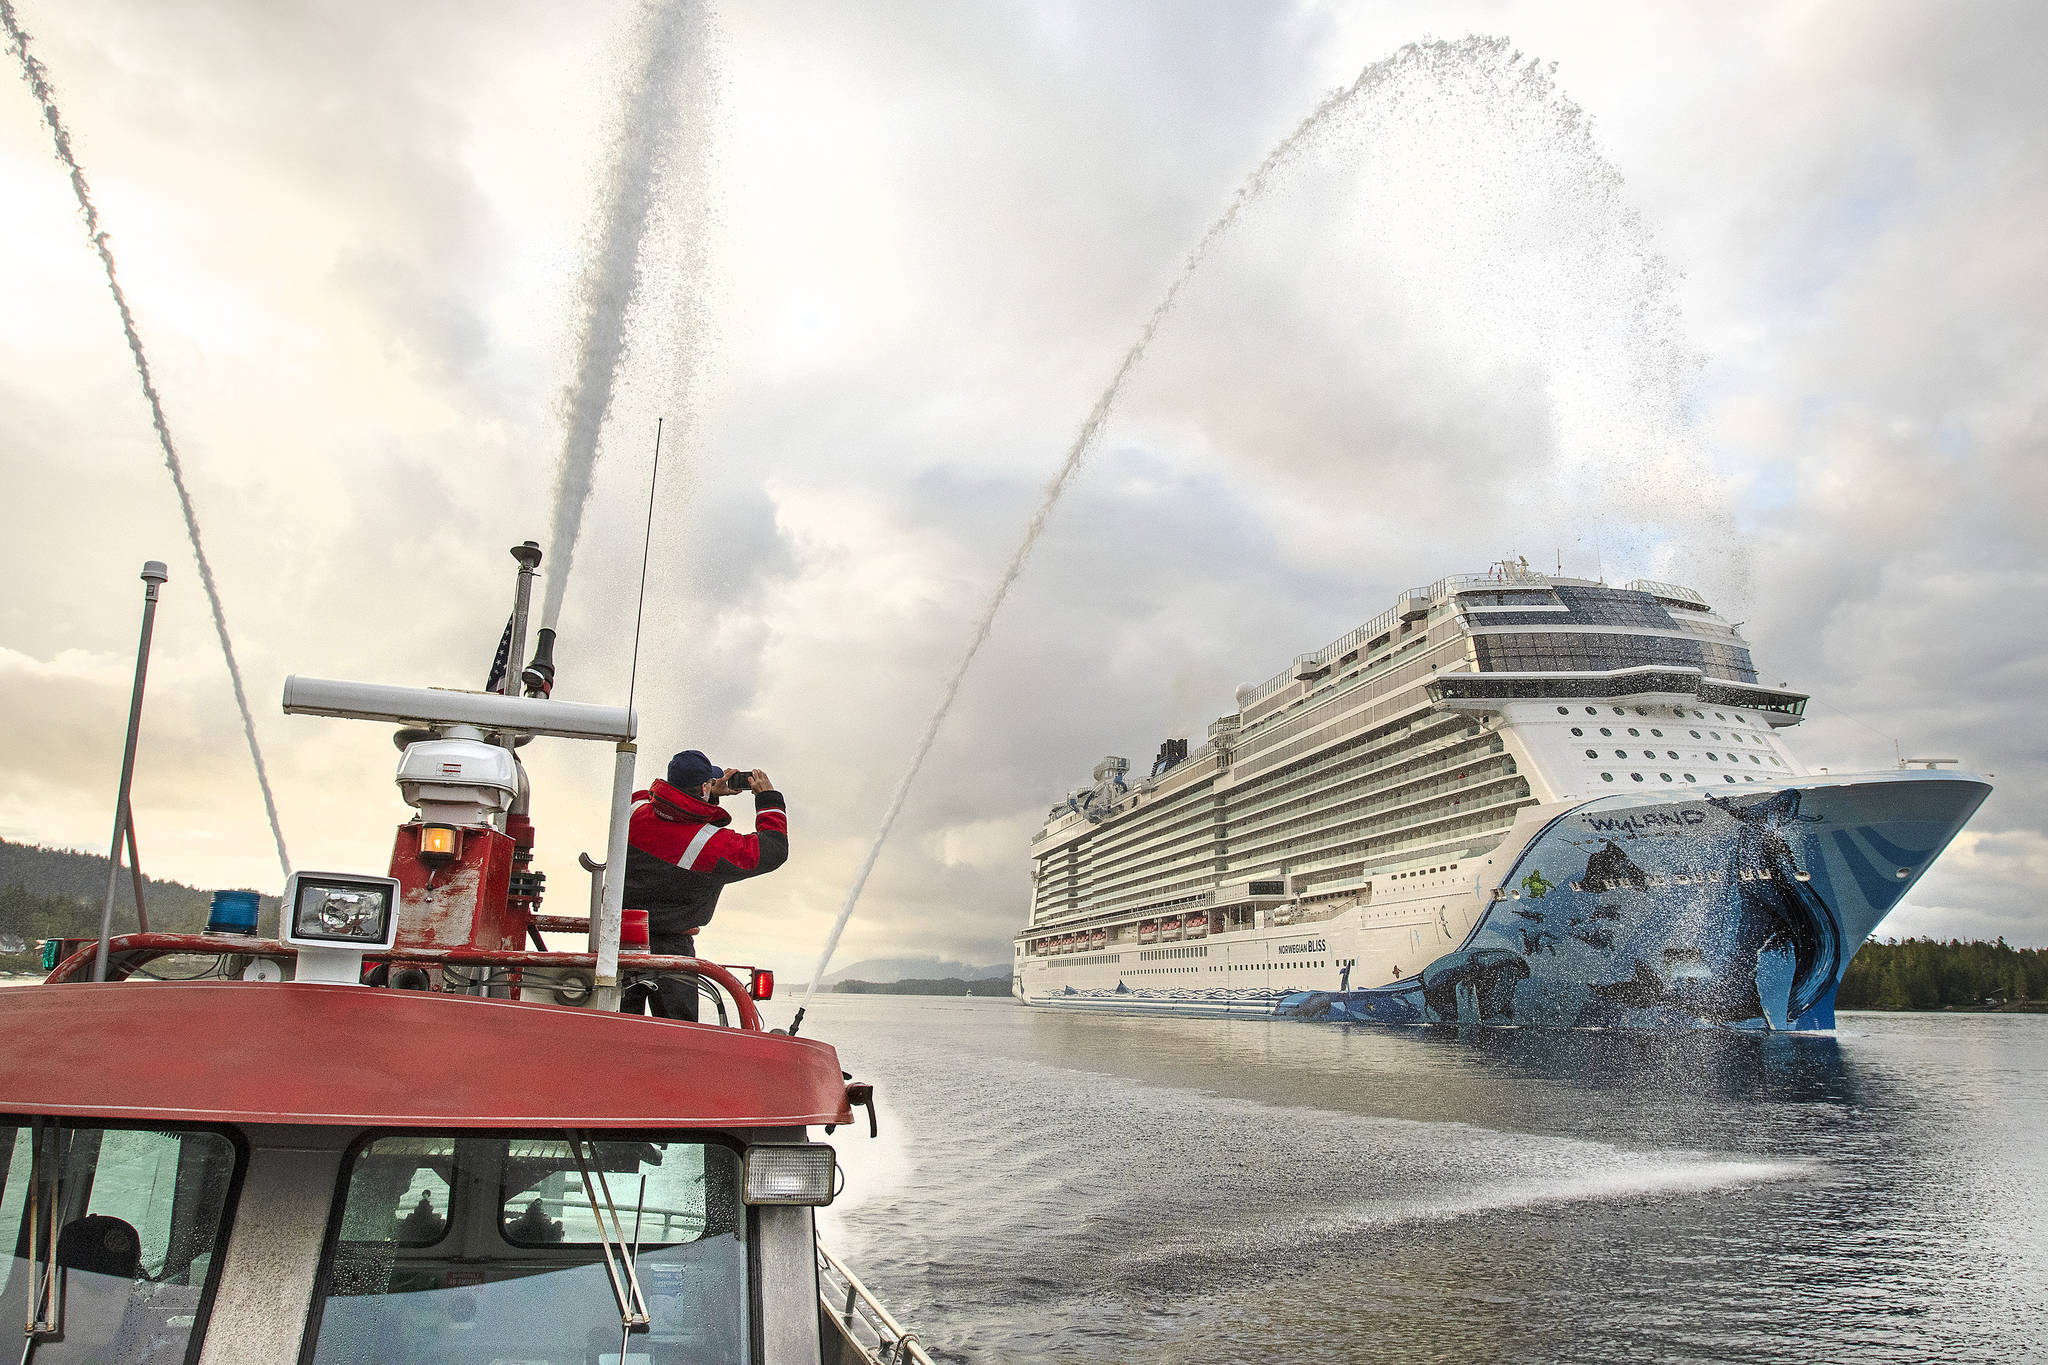 Firefighter medic Andy Tighe snaps a photo of the breakaway plus-class cruise ship Norwegian Bliss while Captain Tracy Mettler operates a fireboat in the Tongass Narrows in Ketchikan, Alaska, on June 4, 2018. President Joe Biden signed into law Monday, May 24, 2021, legislation that opens a door for resumed cruise ship travel to Alaska after the pandemic last year scrapped sailings. (Dustin Safranek/Ketchikan Daily News)